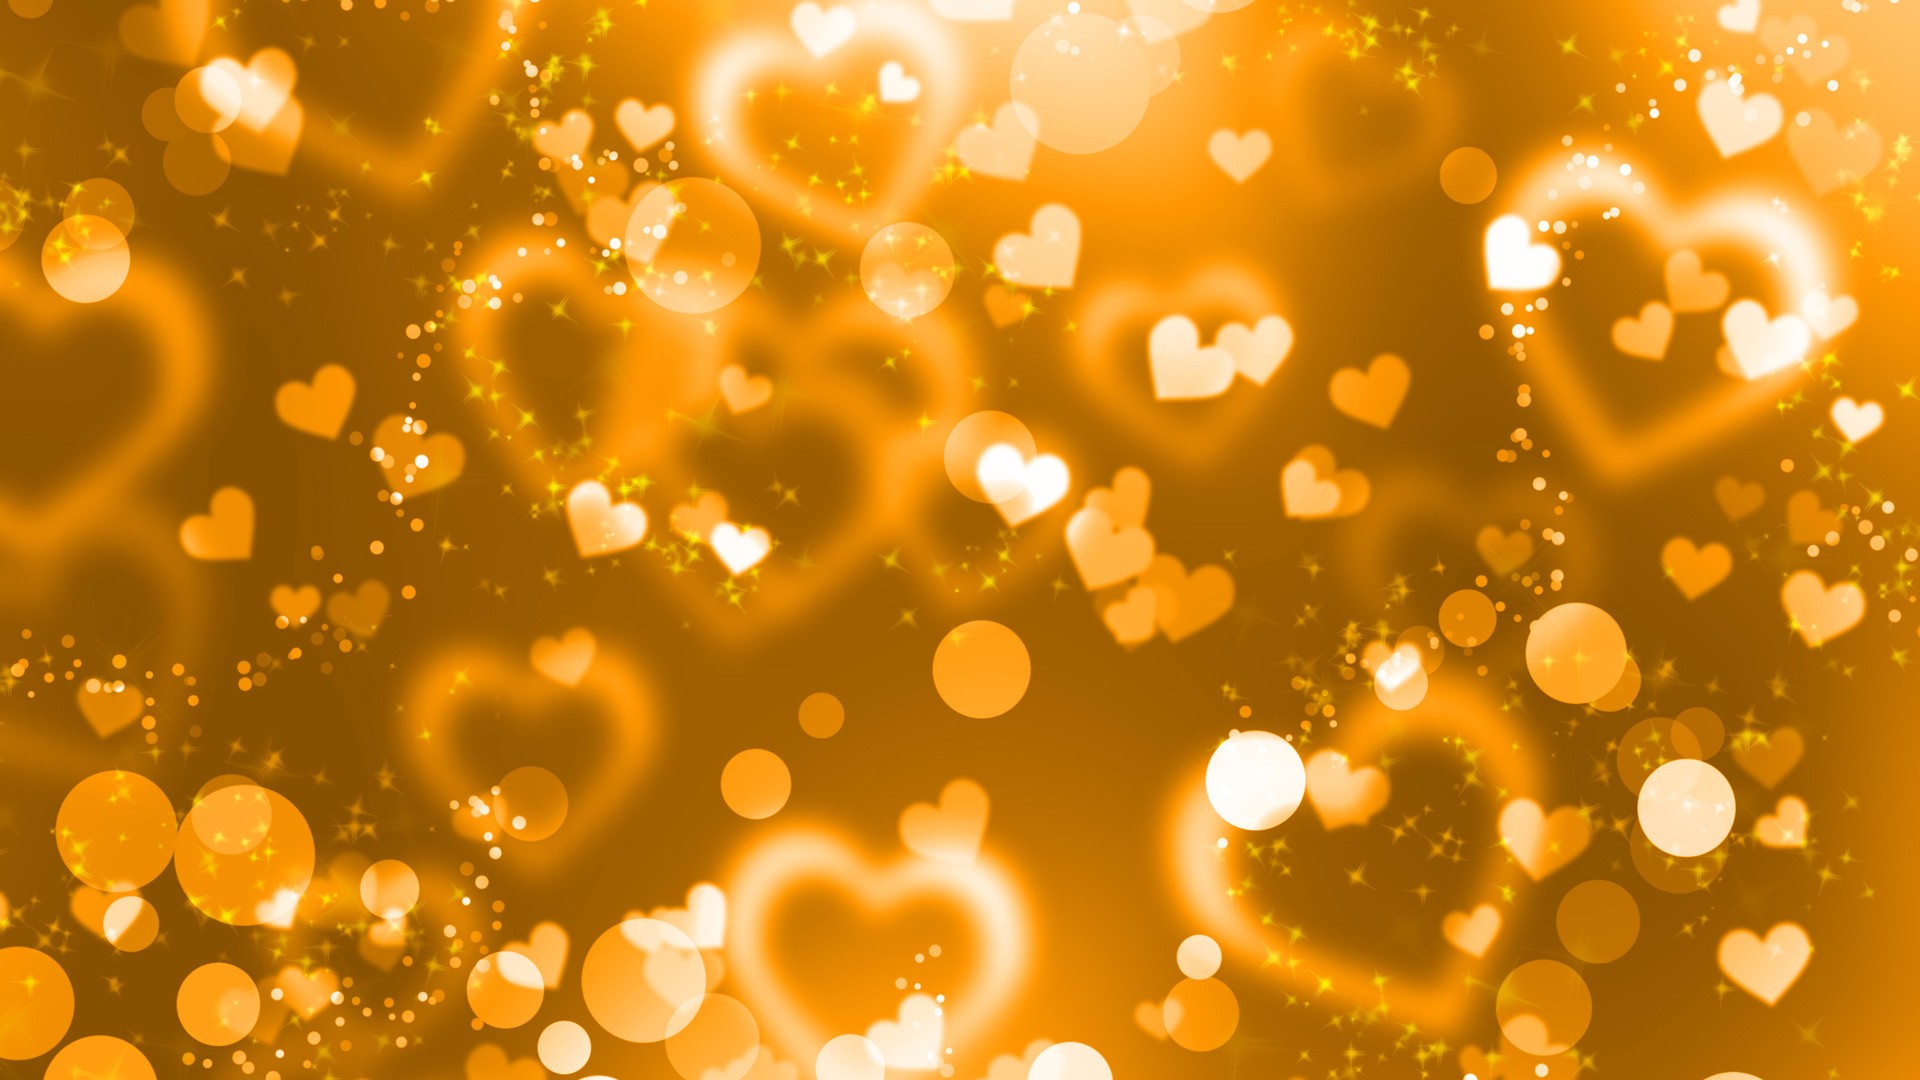 31 Gold Backgrounds Download Free Amazing Full HD Backgrounds